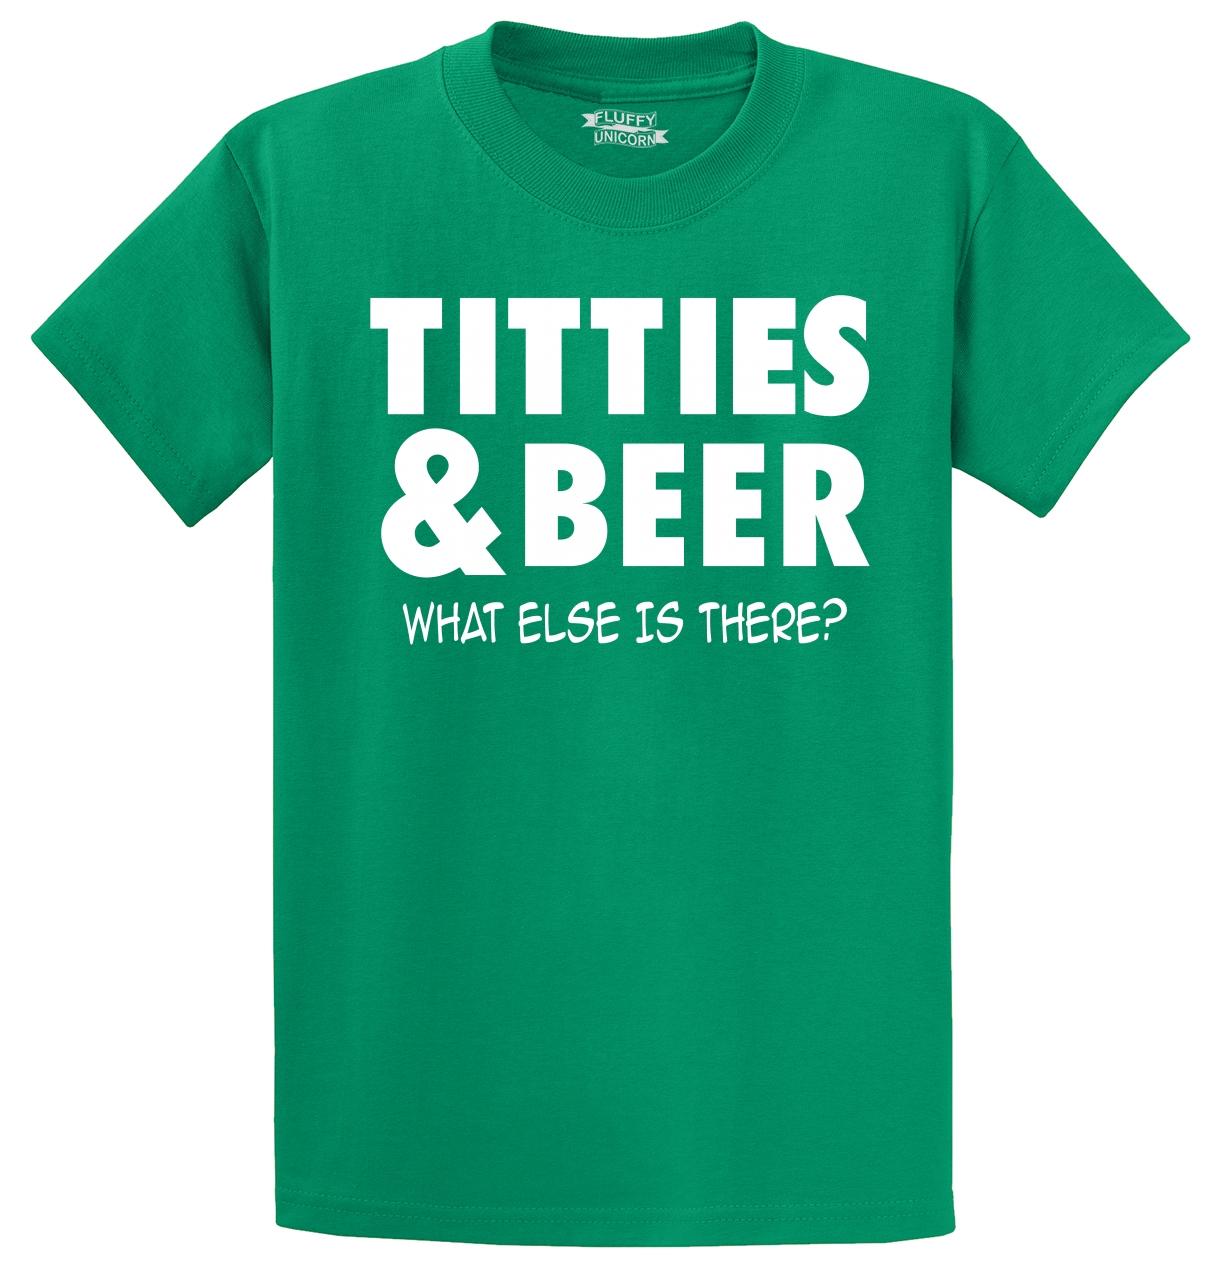 Titties And Beer What Else Is There Funny T Shirt Sexual Humor Alcohol Party Tee Ebay